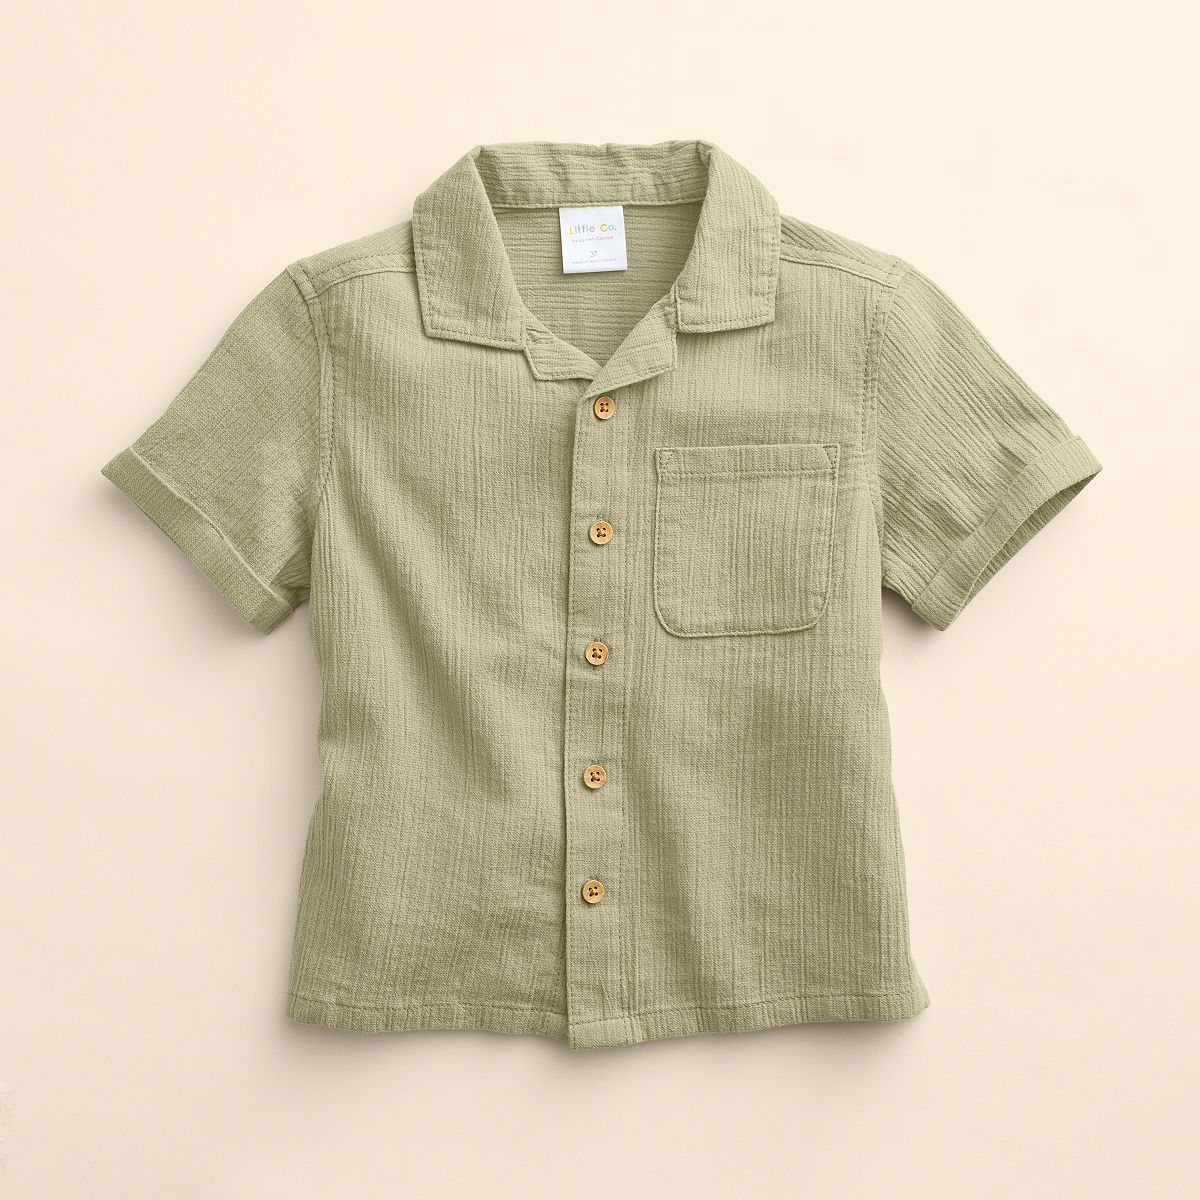 Baby & Toddler Little Co. by Lauren Conrad Organic Button-Up Shirt | Kohl's